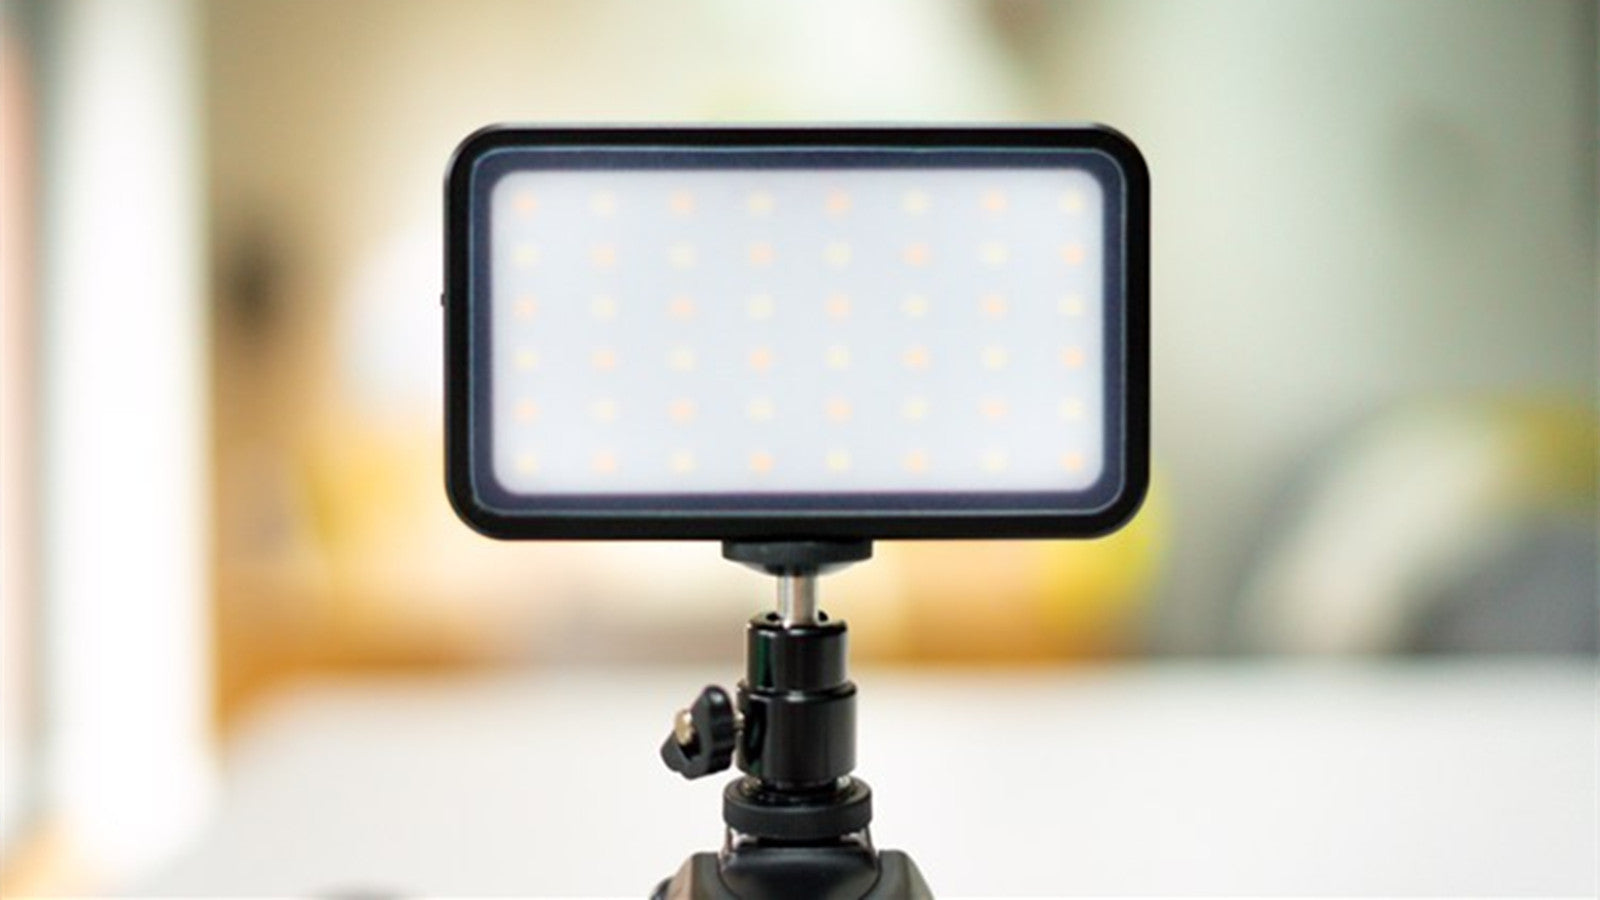 Use supplied cold shoe mount to mount COLBOR PL5 video camera LED light on camera